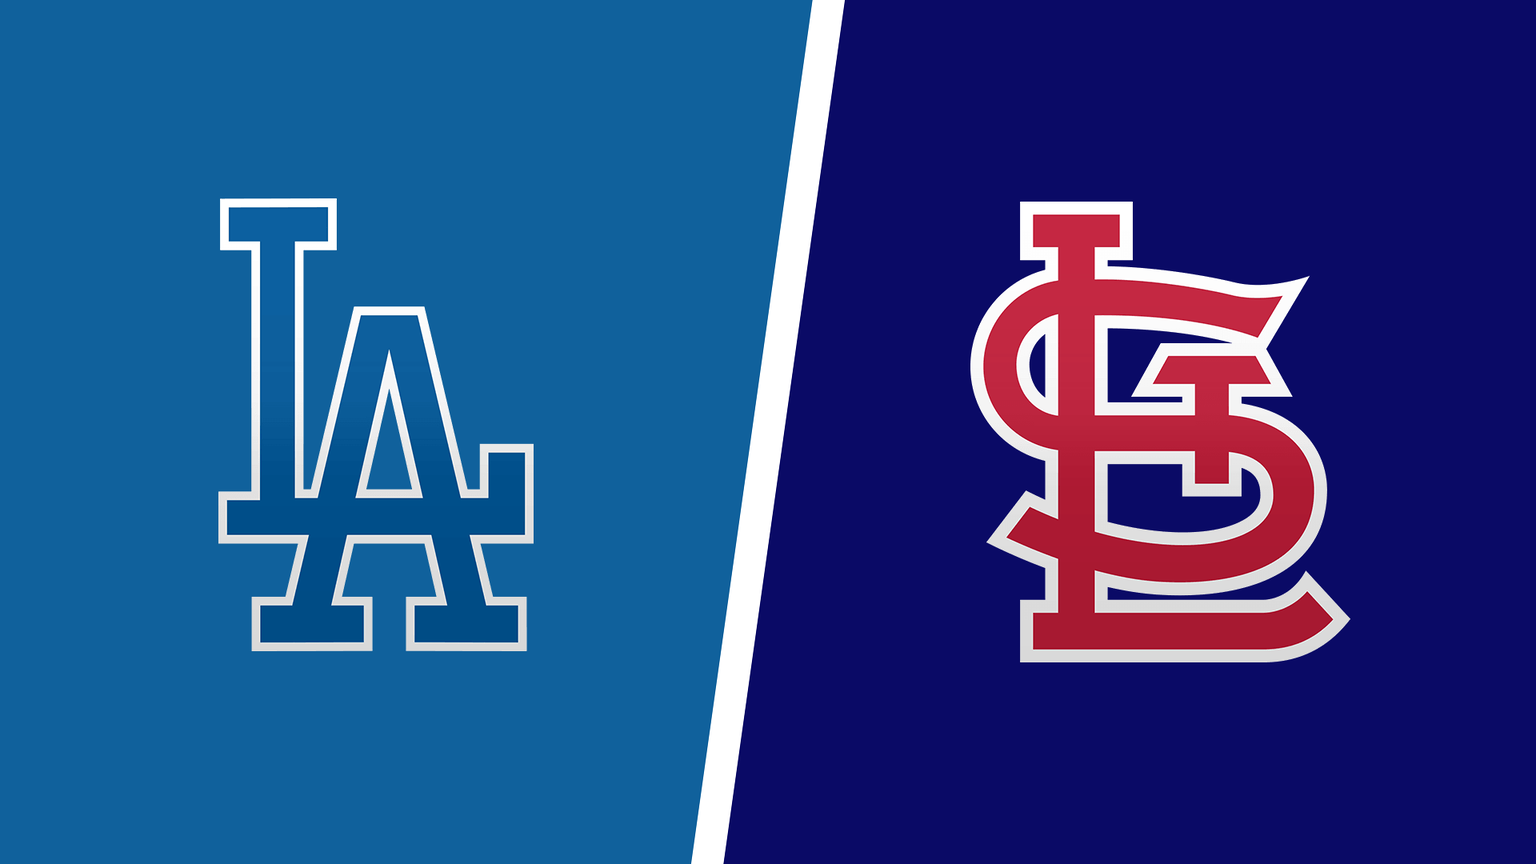 How to Watch St. Louis Cardinals vs. Los Angeles Dodgers Live Online on